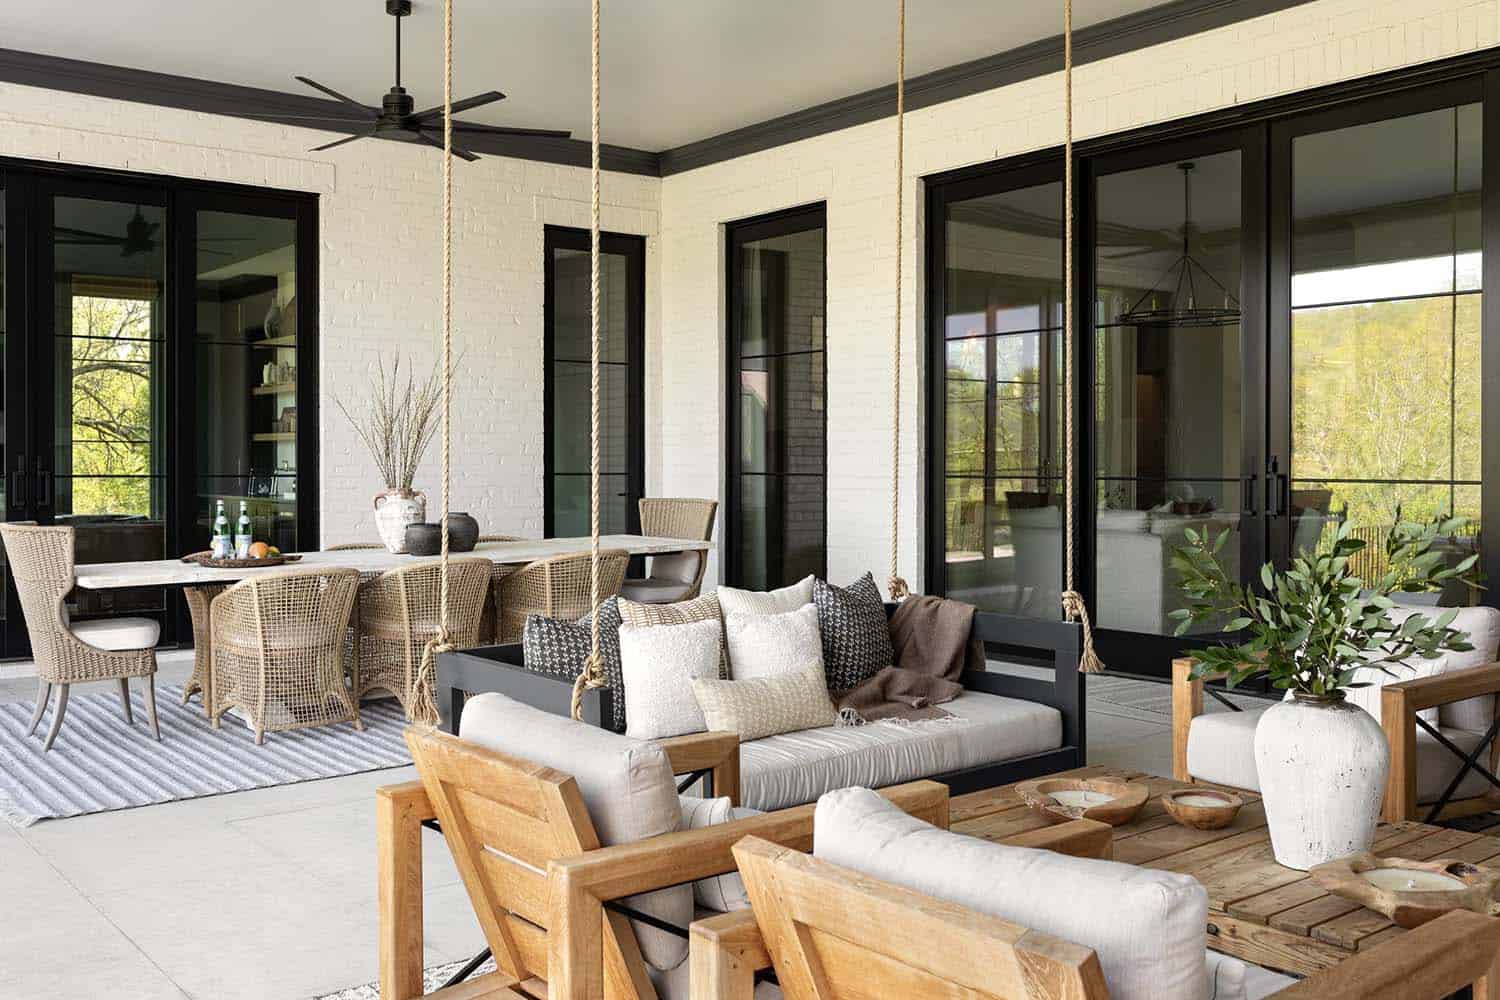 transitional style covered porch with outdoor furniture